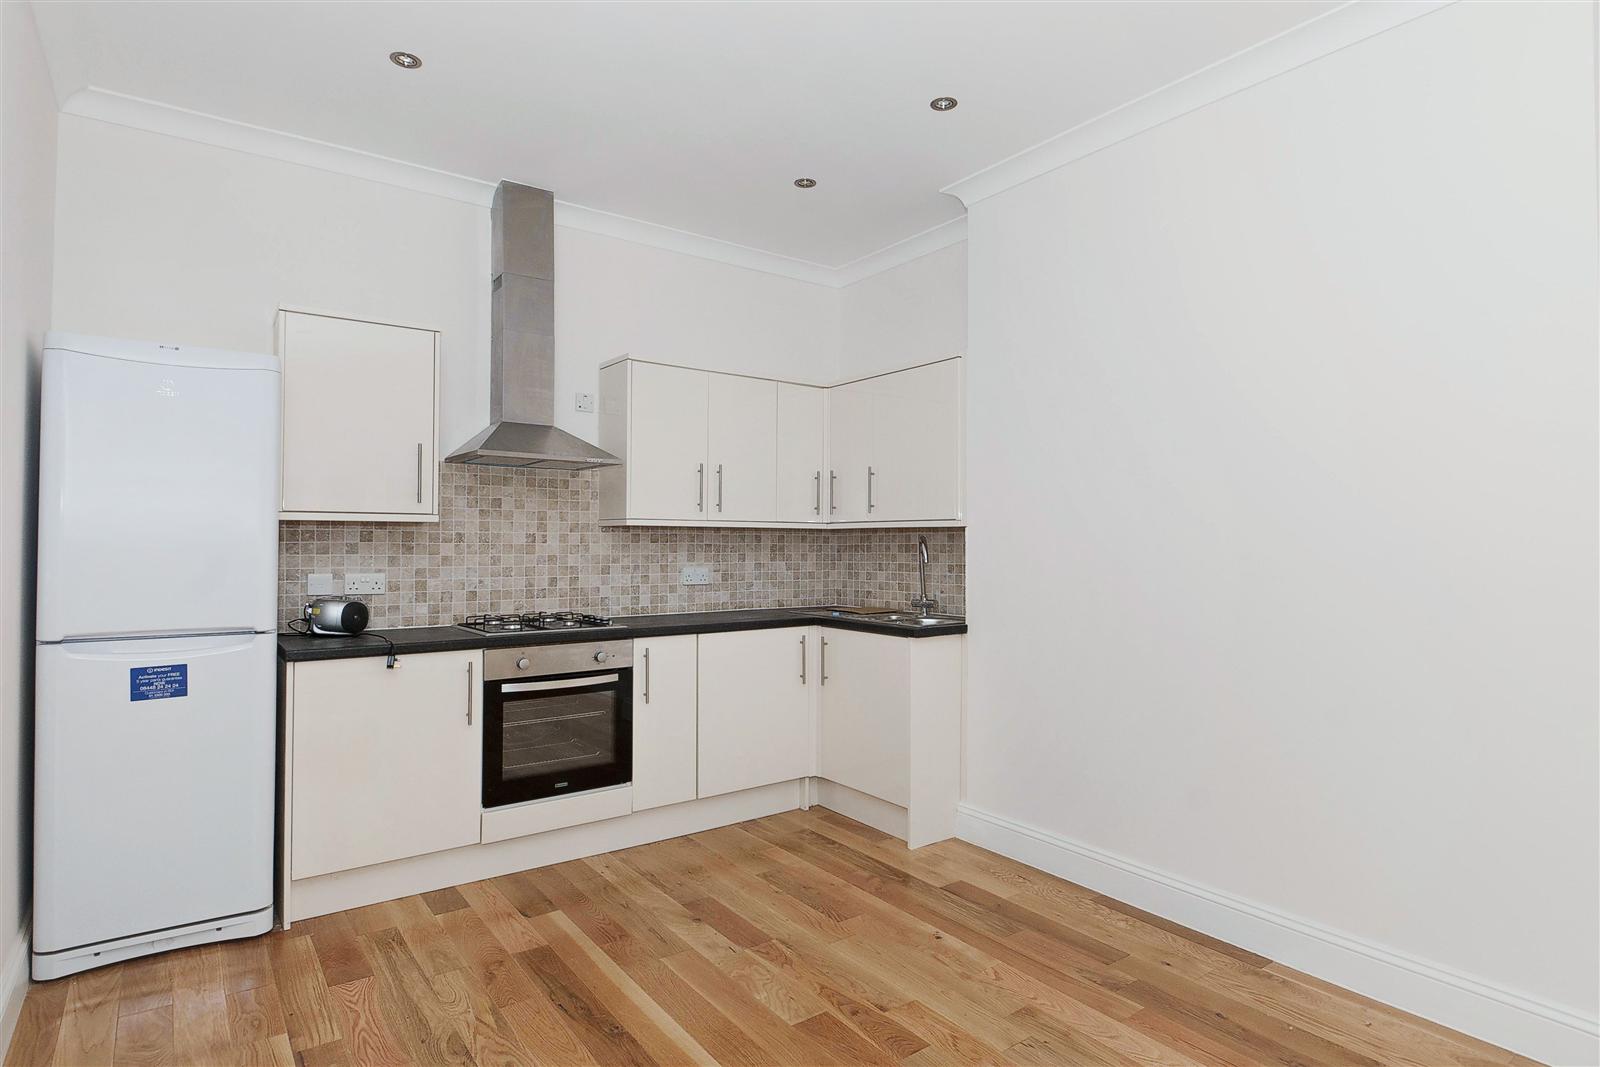 AVAILABLE FROM 7TH JUNE 2022. Forming part of a development of converted flats within a pair of semi detached period houses is this raised ground floor 590 square ft. apartment. The accommodation comprises of a LARGE DOUBLE BEDROOM,  large open plan reception/kitchen leading to a PRIVATE ...